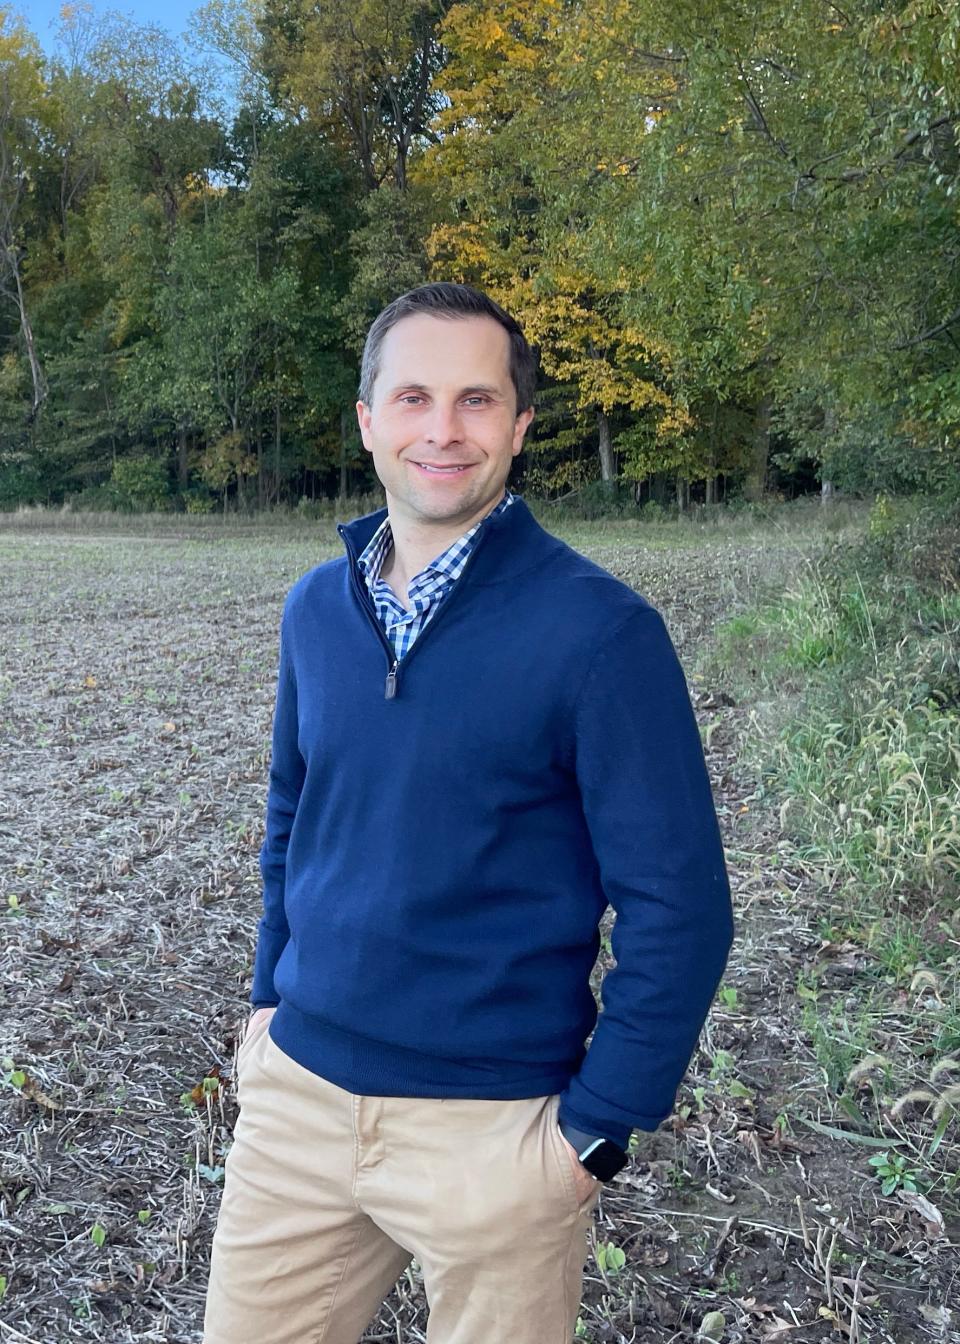 Spencer Deery, a Purdue administrator and aide to Mitch Daniel, announced Monday he will run for Indiana's 23rd Senate District seat.